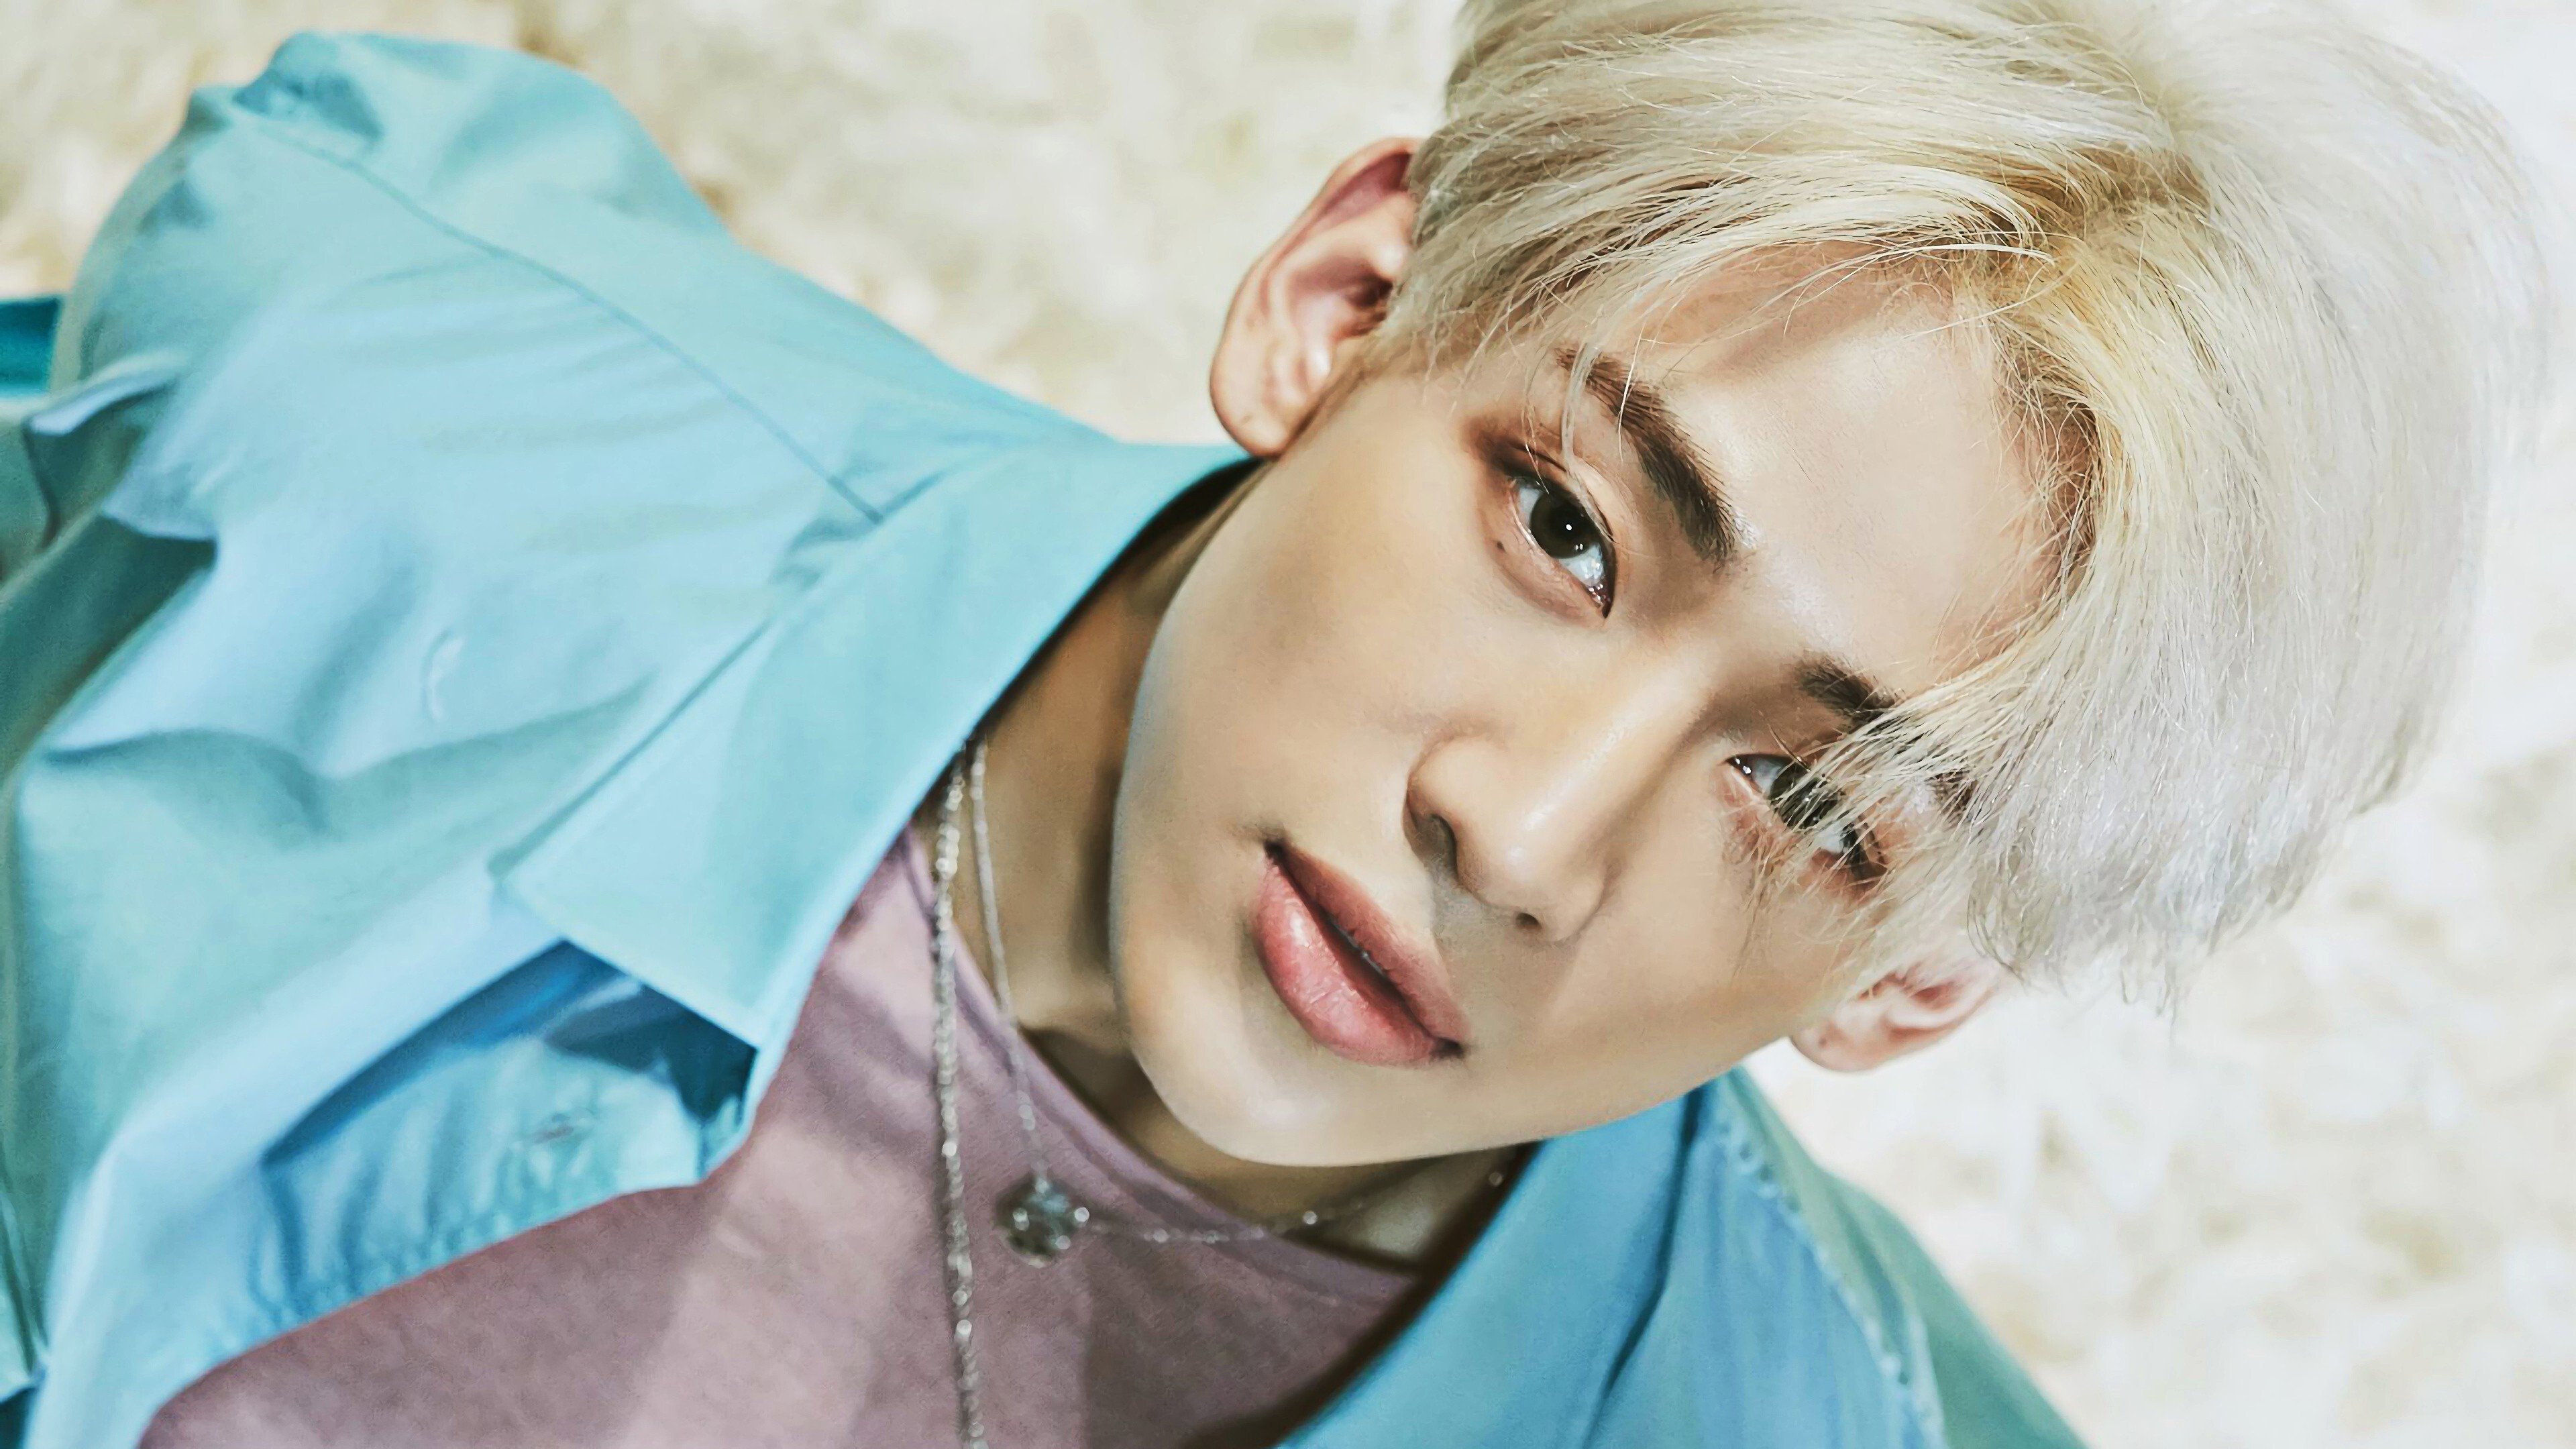 BamBam is a rapper with boy band Got7 and is Thailand’s biggest K-pop star.